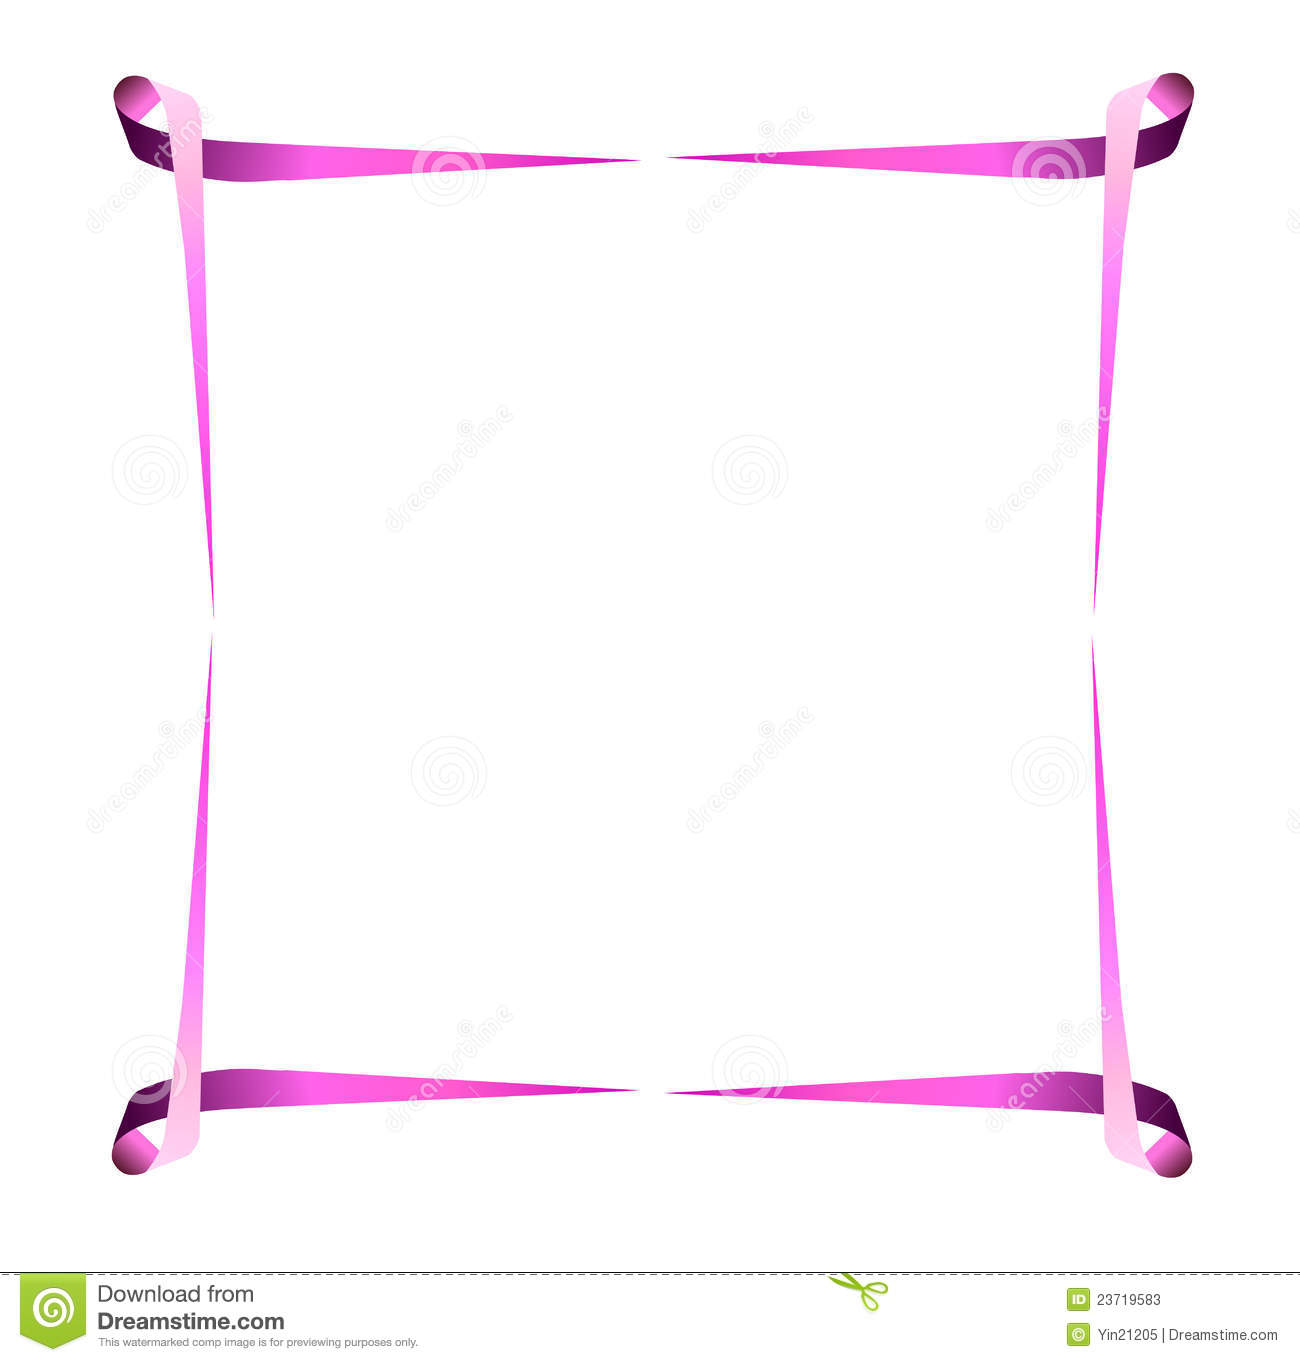 Illustrated Breast Cancer Border With Pink Ribbons Eps File Is